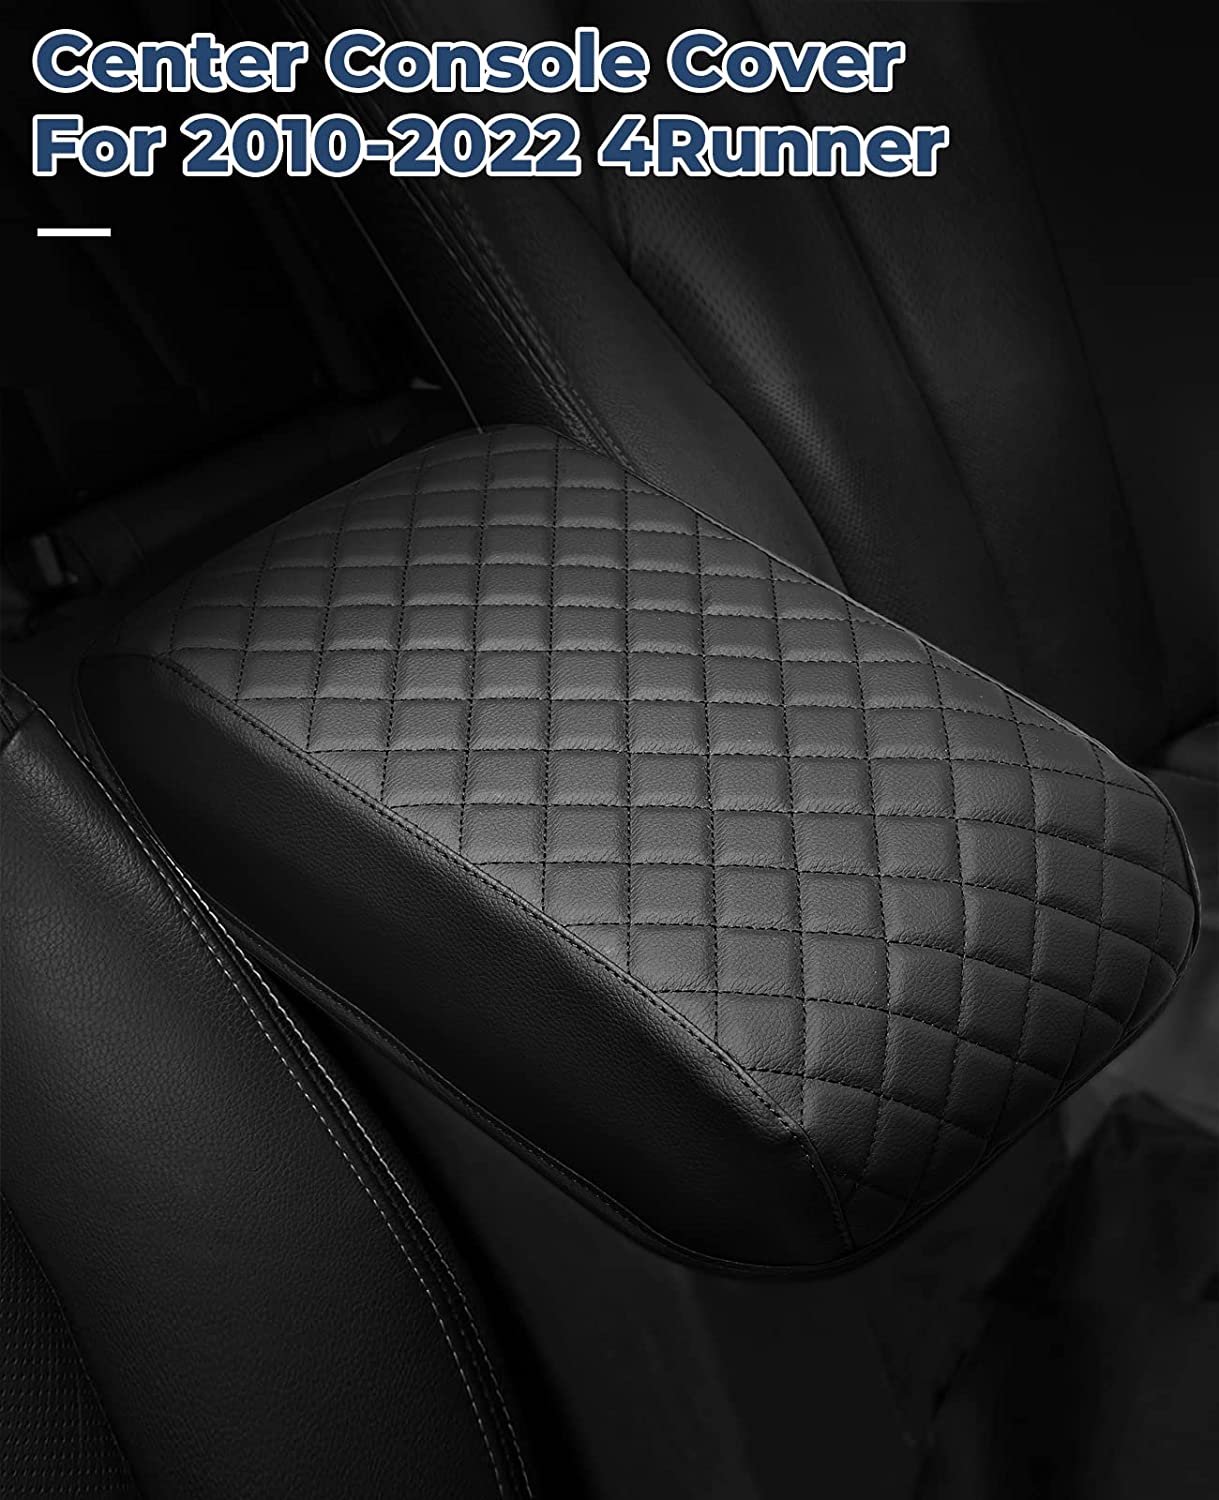 Center Console Cover Customized Armrest Cover Compatible with 2010-2022 4Runner, Soft Cozy Leather Arm Rest Covering for Car, Well-Make Durable Console Cushion Pad, Easy to Install, Black